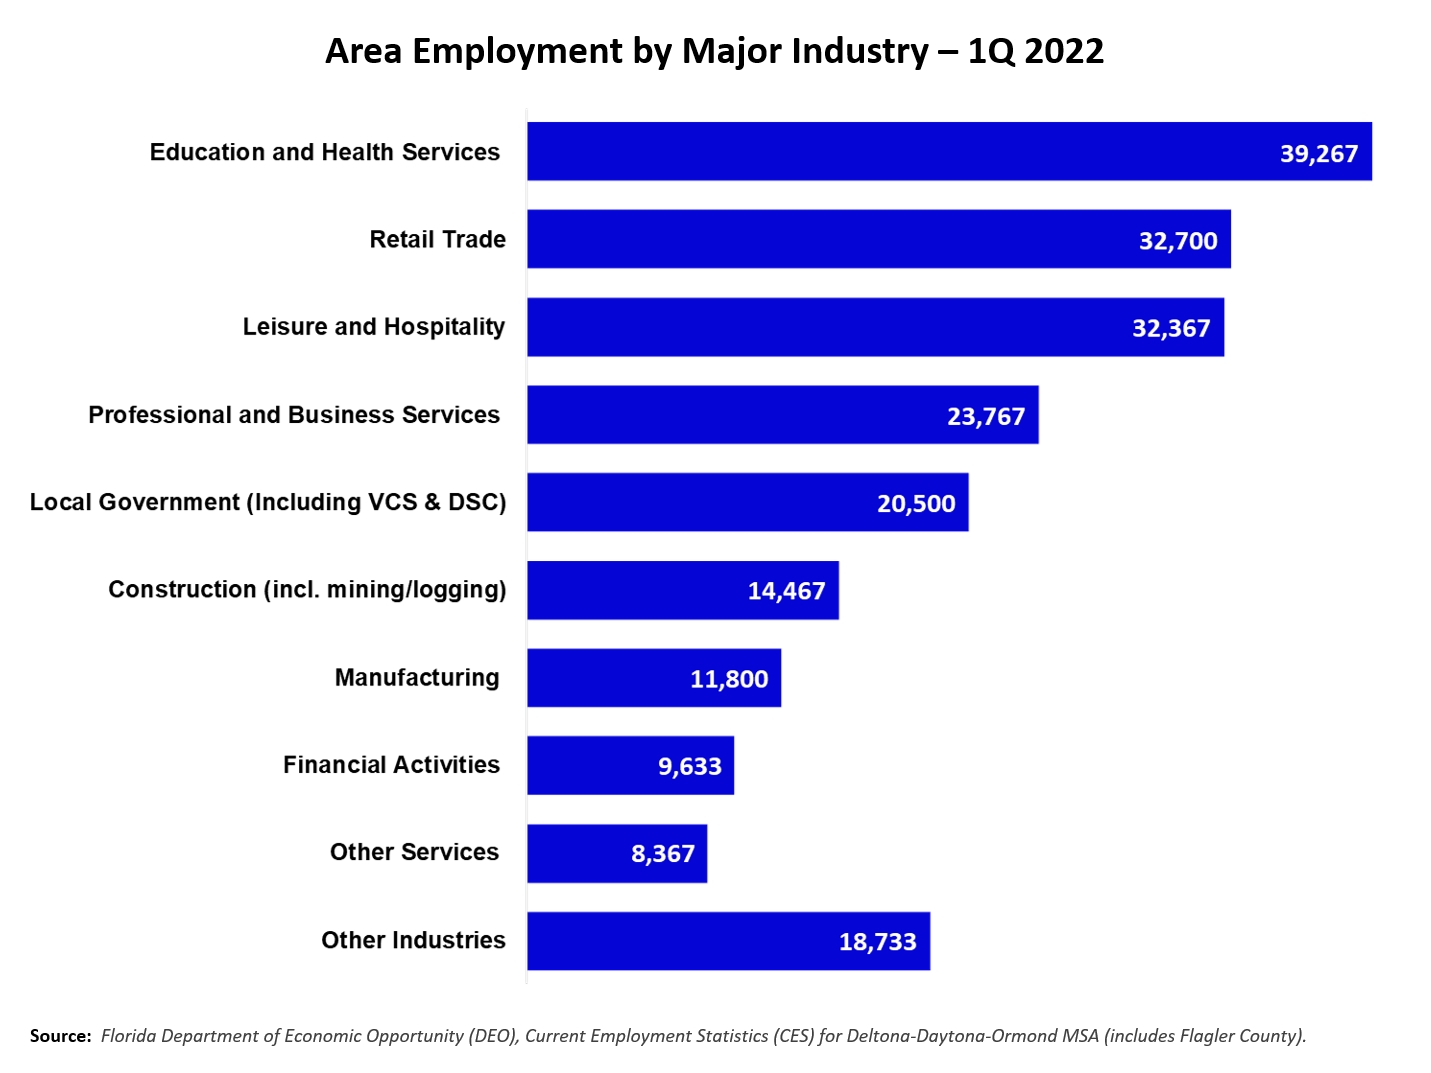 Area Employment by Major Industry chart